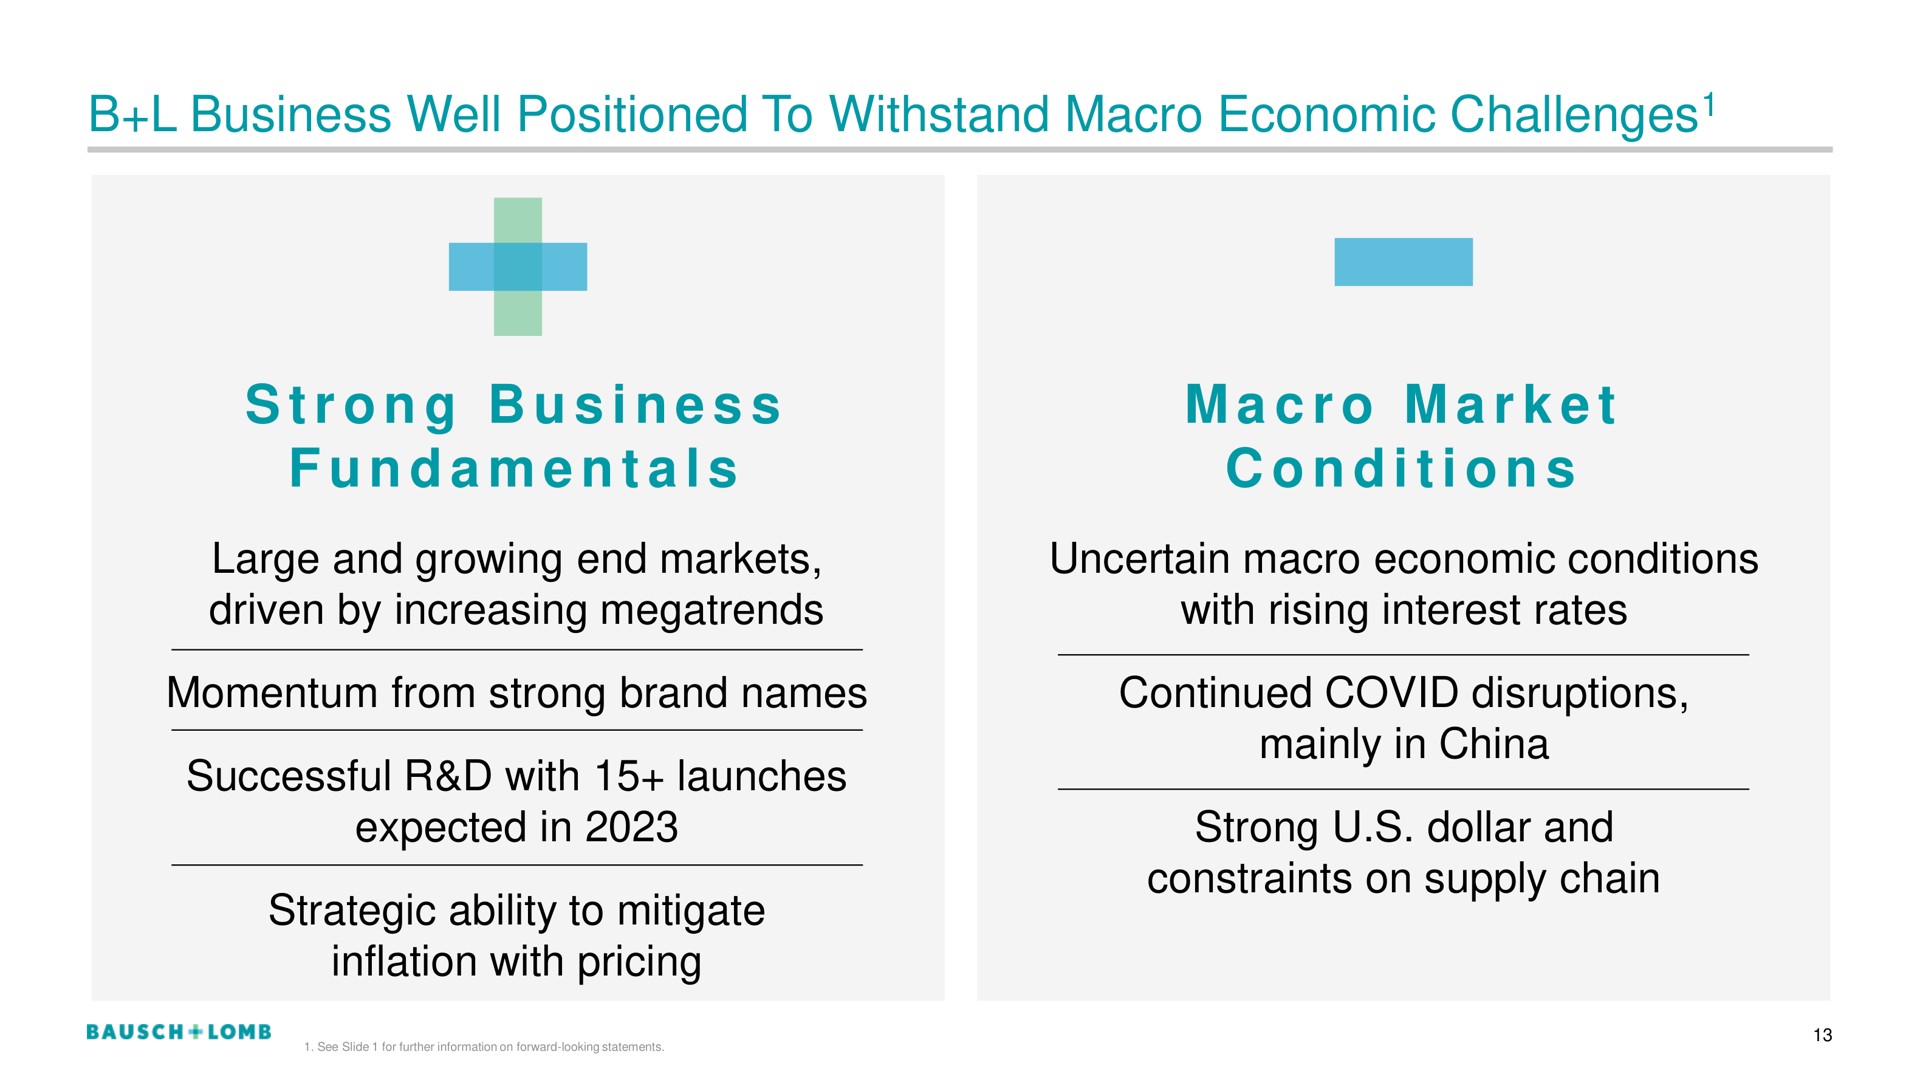 business well positioned to withstand macro economic challenges i a a a a i i challenges strong fundamentals market conditions | Bausch+Lomb